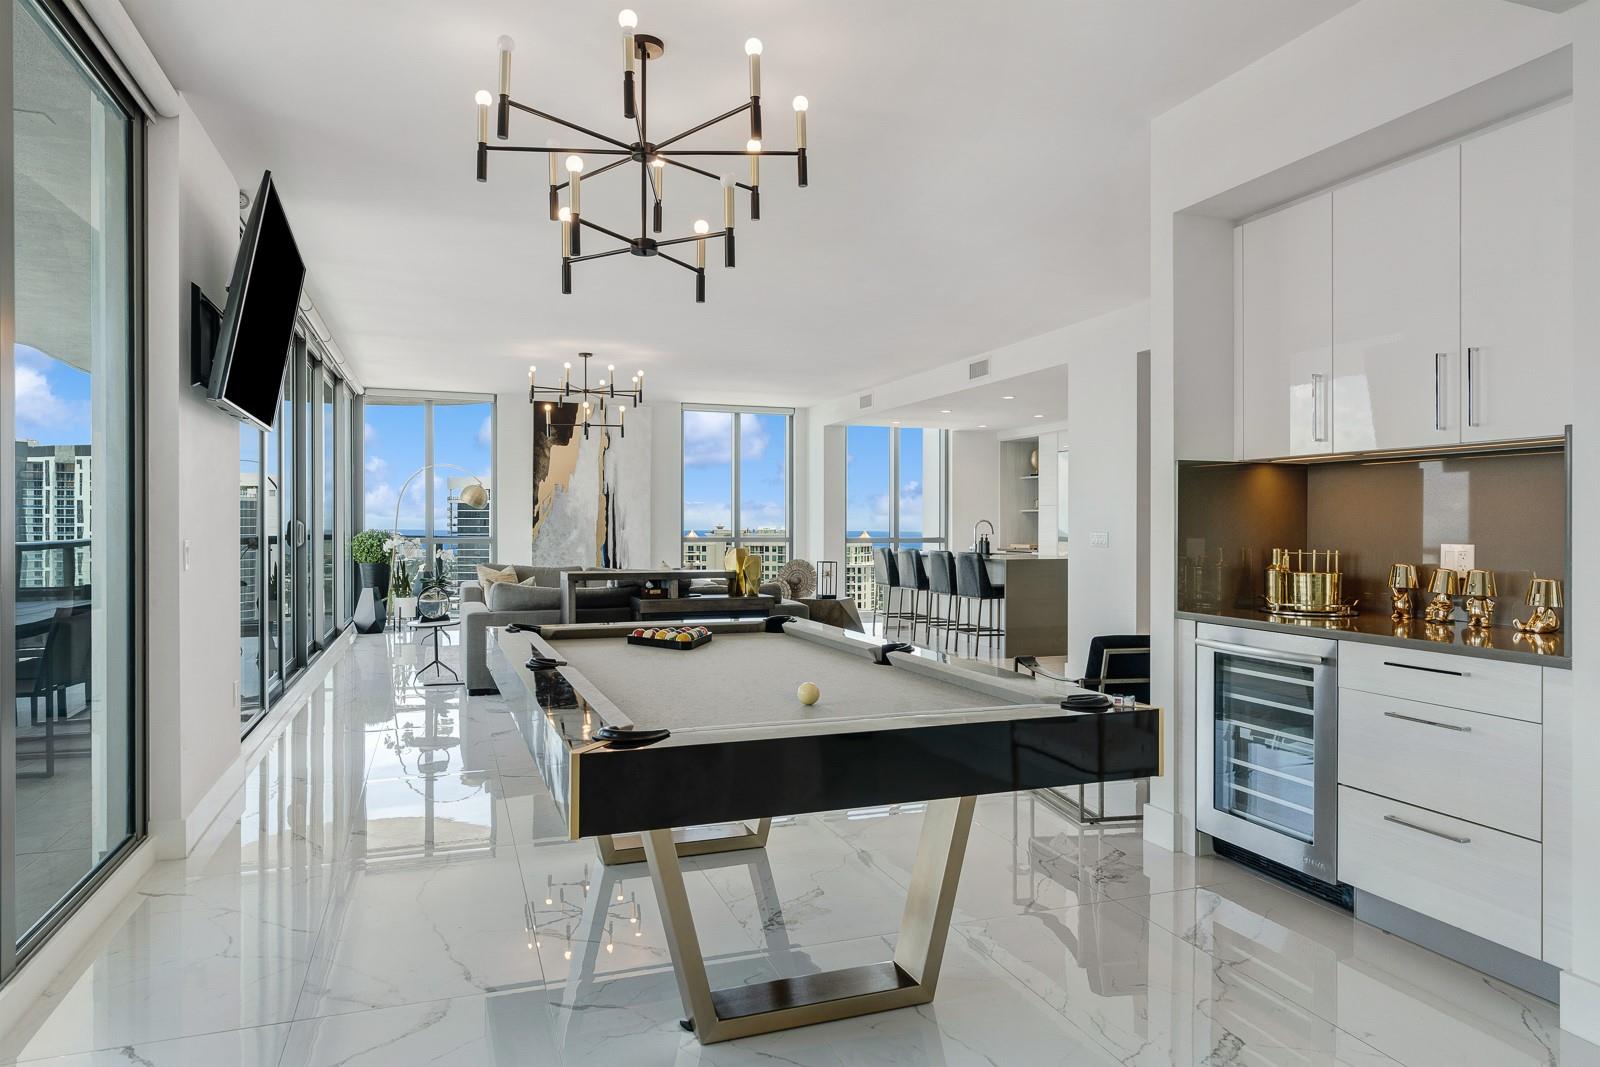 This luxury unit soars 40 floors above the city center, offering mesmerizing skyline views through floor-to-ceiling windows. The 1 of 6 estate plan features private elevator entrance, access-controlled entry points, a 4-bedroom, 4.5-bath plan with a formal dining room, family room, theatre room, premium flooring, European kitchen cabinetry, quartz countertops, high-end fixtures and private terraces with glass railings designed for unobstructed city views.

This unit seamlessly blends indoor and outdoor living and offers four tranquil bedroom suites. Perfect views and spaces for entertaining; you can serve guests in the eat-in kitchen, formal dining room, or step onto the sky terrace for panoramic sunsets.